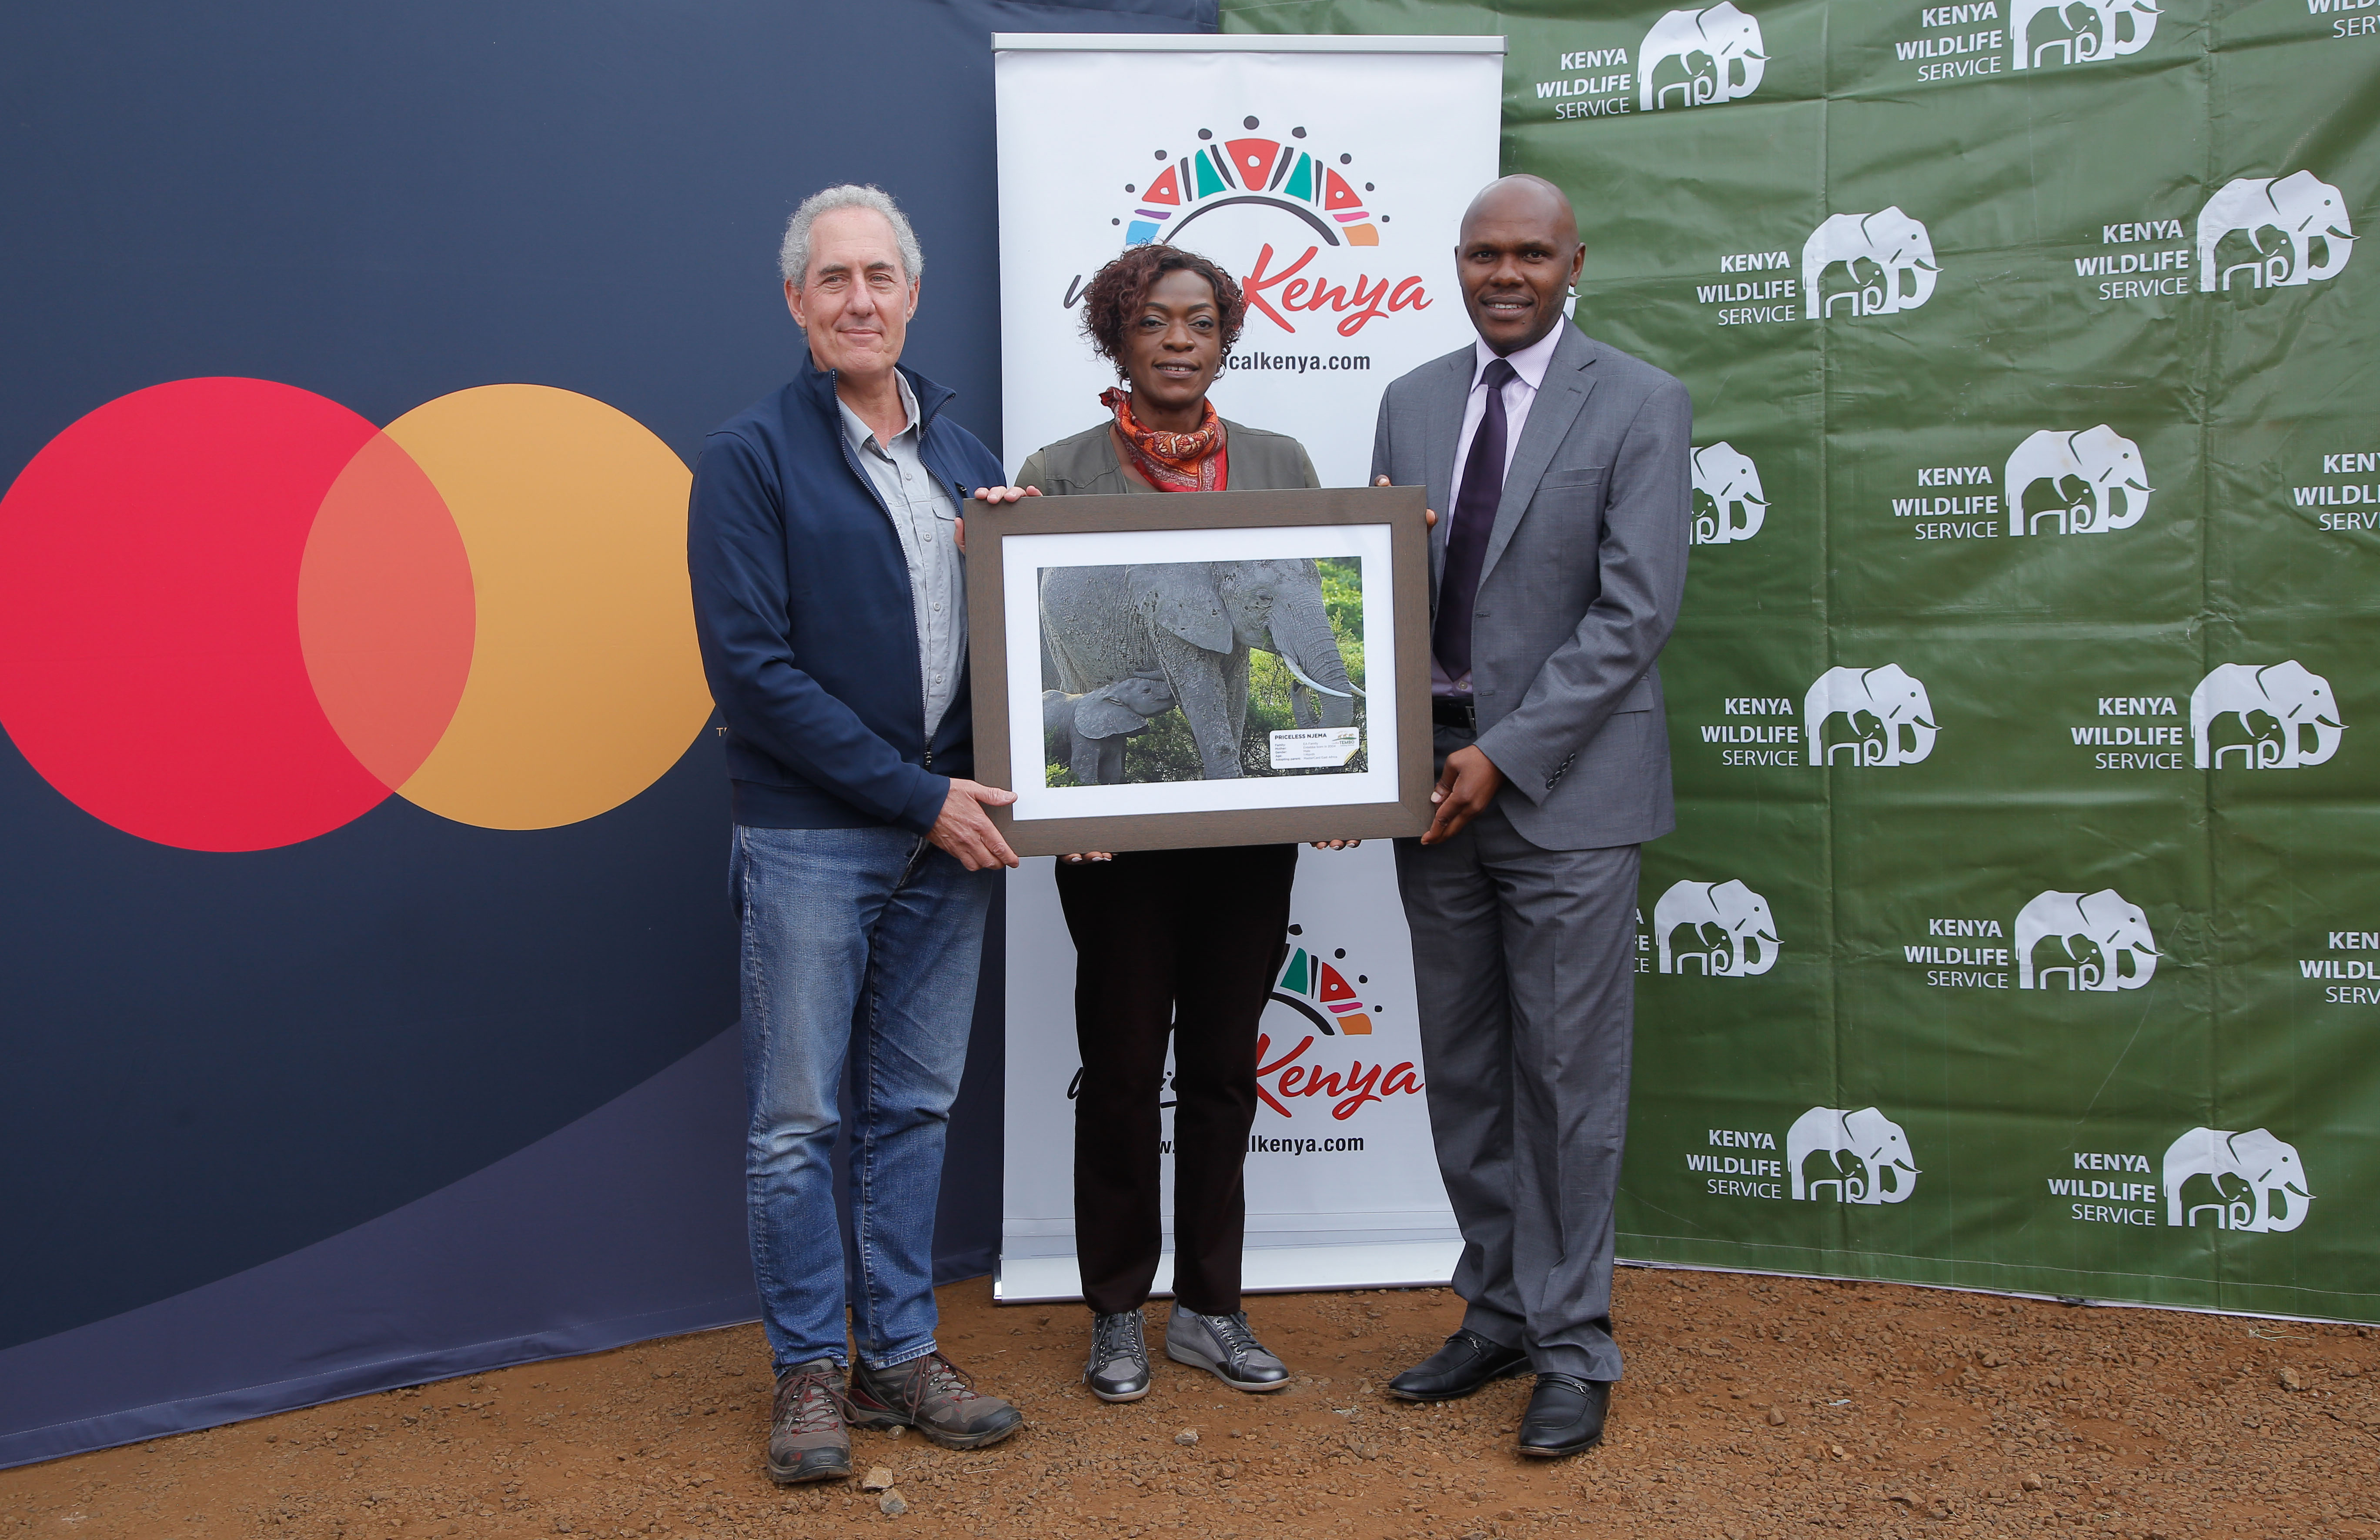 (L-R) Michael Froman, Vice Chairman and President, Strategic Growth for Mastercard, Dr. Betty Radier, CEO, Kenya Tourism Board and Edwin Wanyonyi, Director Strategy and Change, Kenya Wildlife Services, at the Nairobi National Park, for the Magical Kenya Tembo naming festival, an elephant conservation sustainability tactic where Michael Froman had the honor of  naming a one month old elephant “Priceless Njema” which loosely translates to “It is great”. Mastercard has partnered with the Kenya Tourism Board to boost tourism into Kenya by leveraging various channels, including its Priceless.com platform.